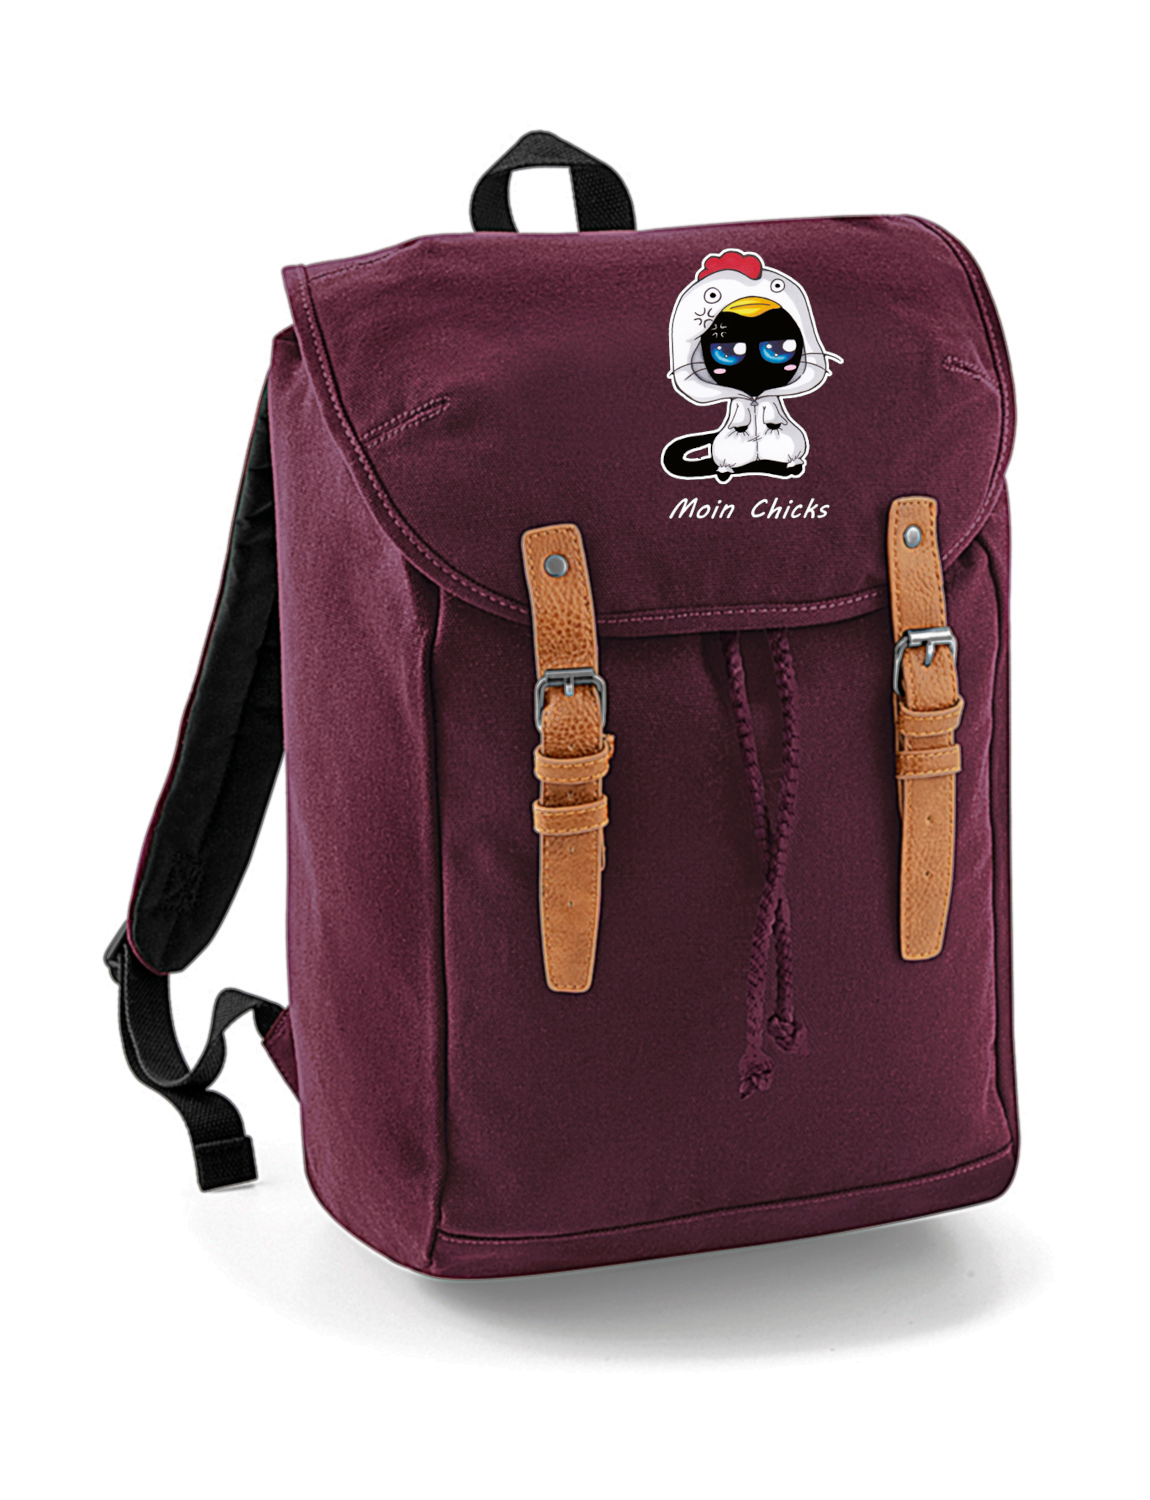 Rucksack Canvas Moin chicks rot